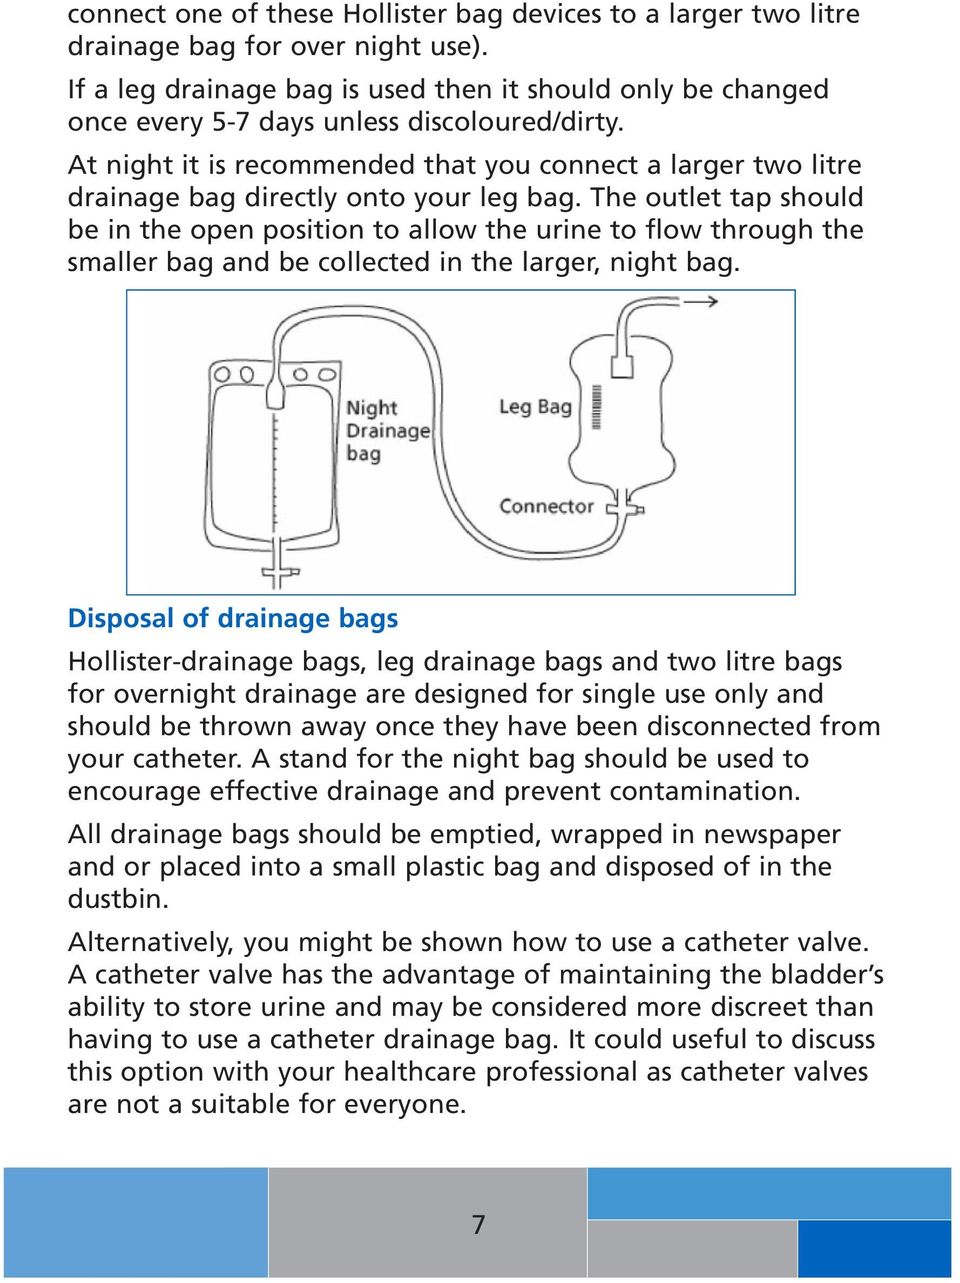 At night it is recommended that you connect a larger two litre drainage bag directly onto your leg bag.